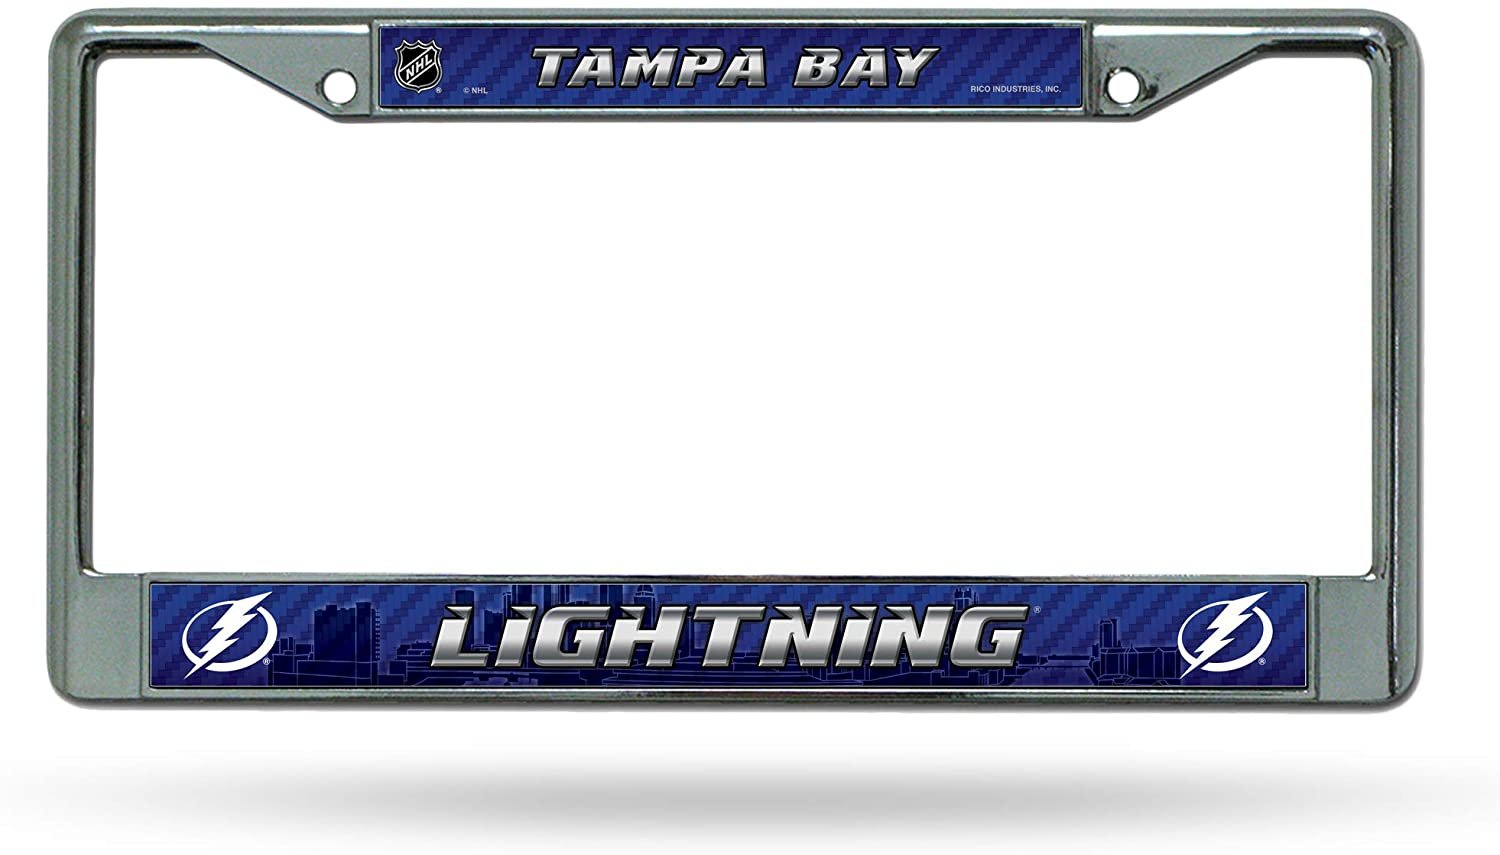 Tampa Bay Lightning Premium Metal License Plate Frame Chrome Tag Cover, 12x6 Inch